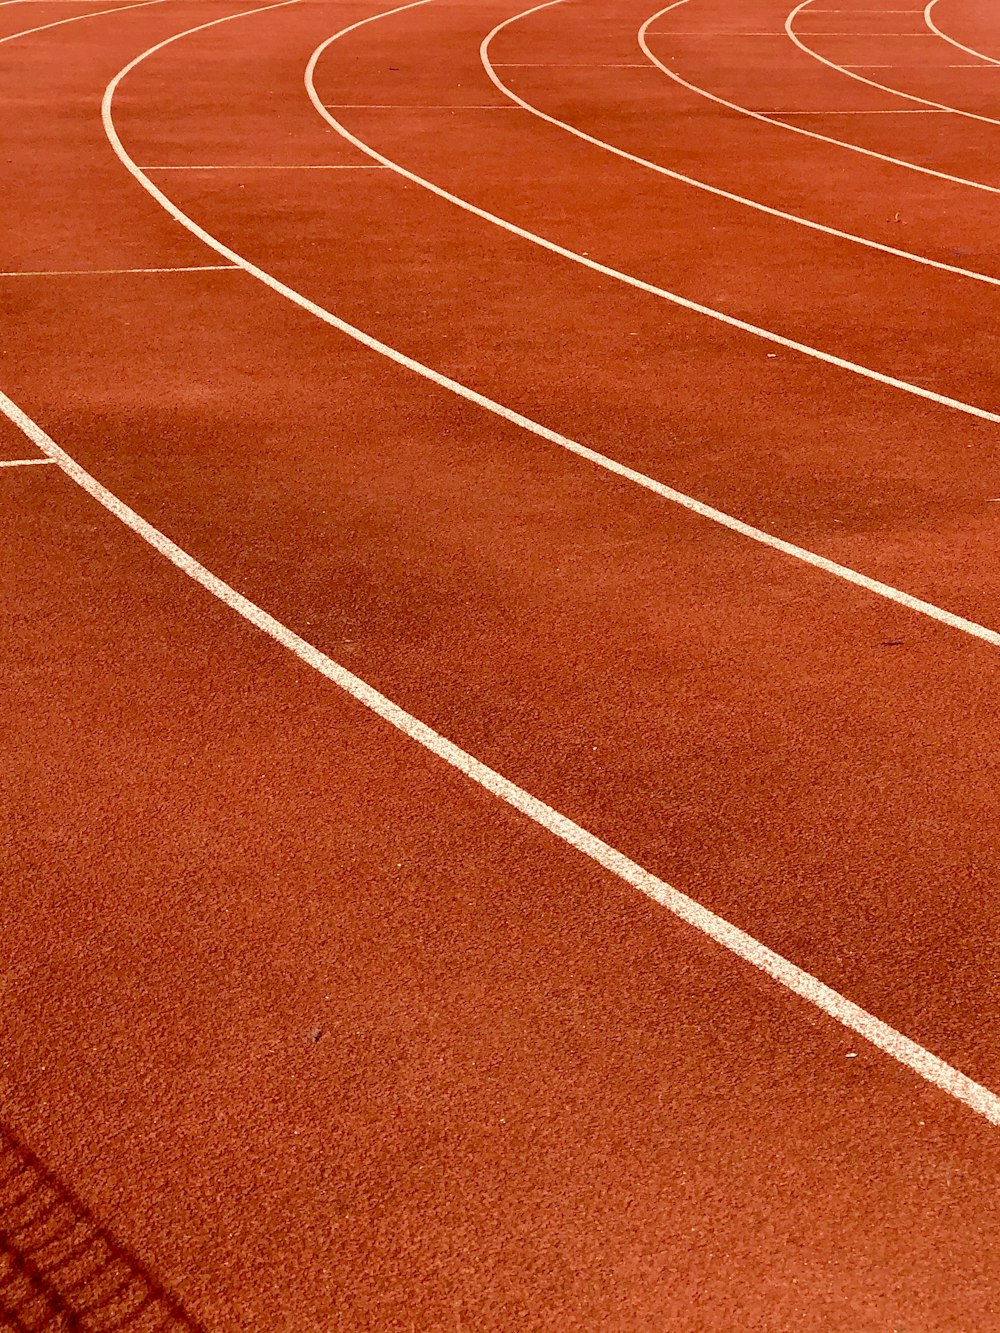 a red running track with white lines on it